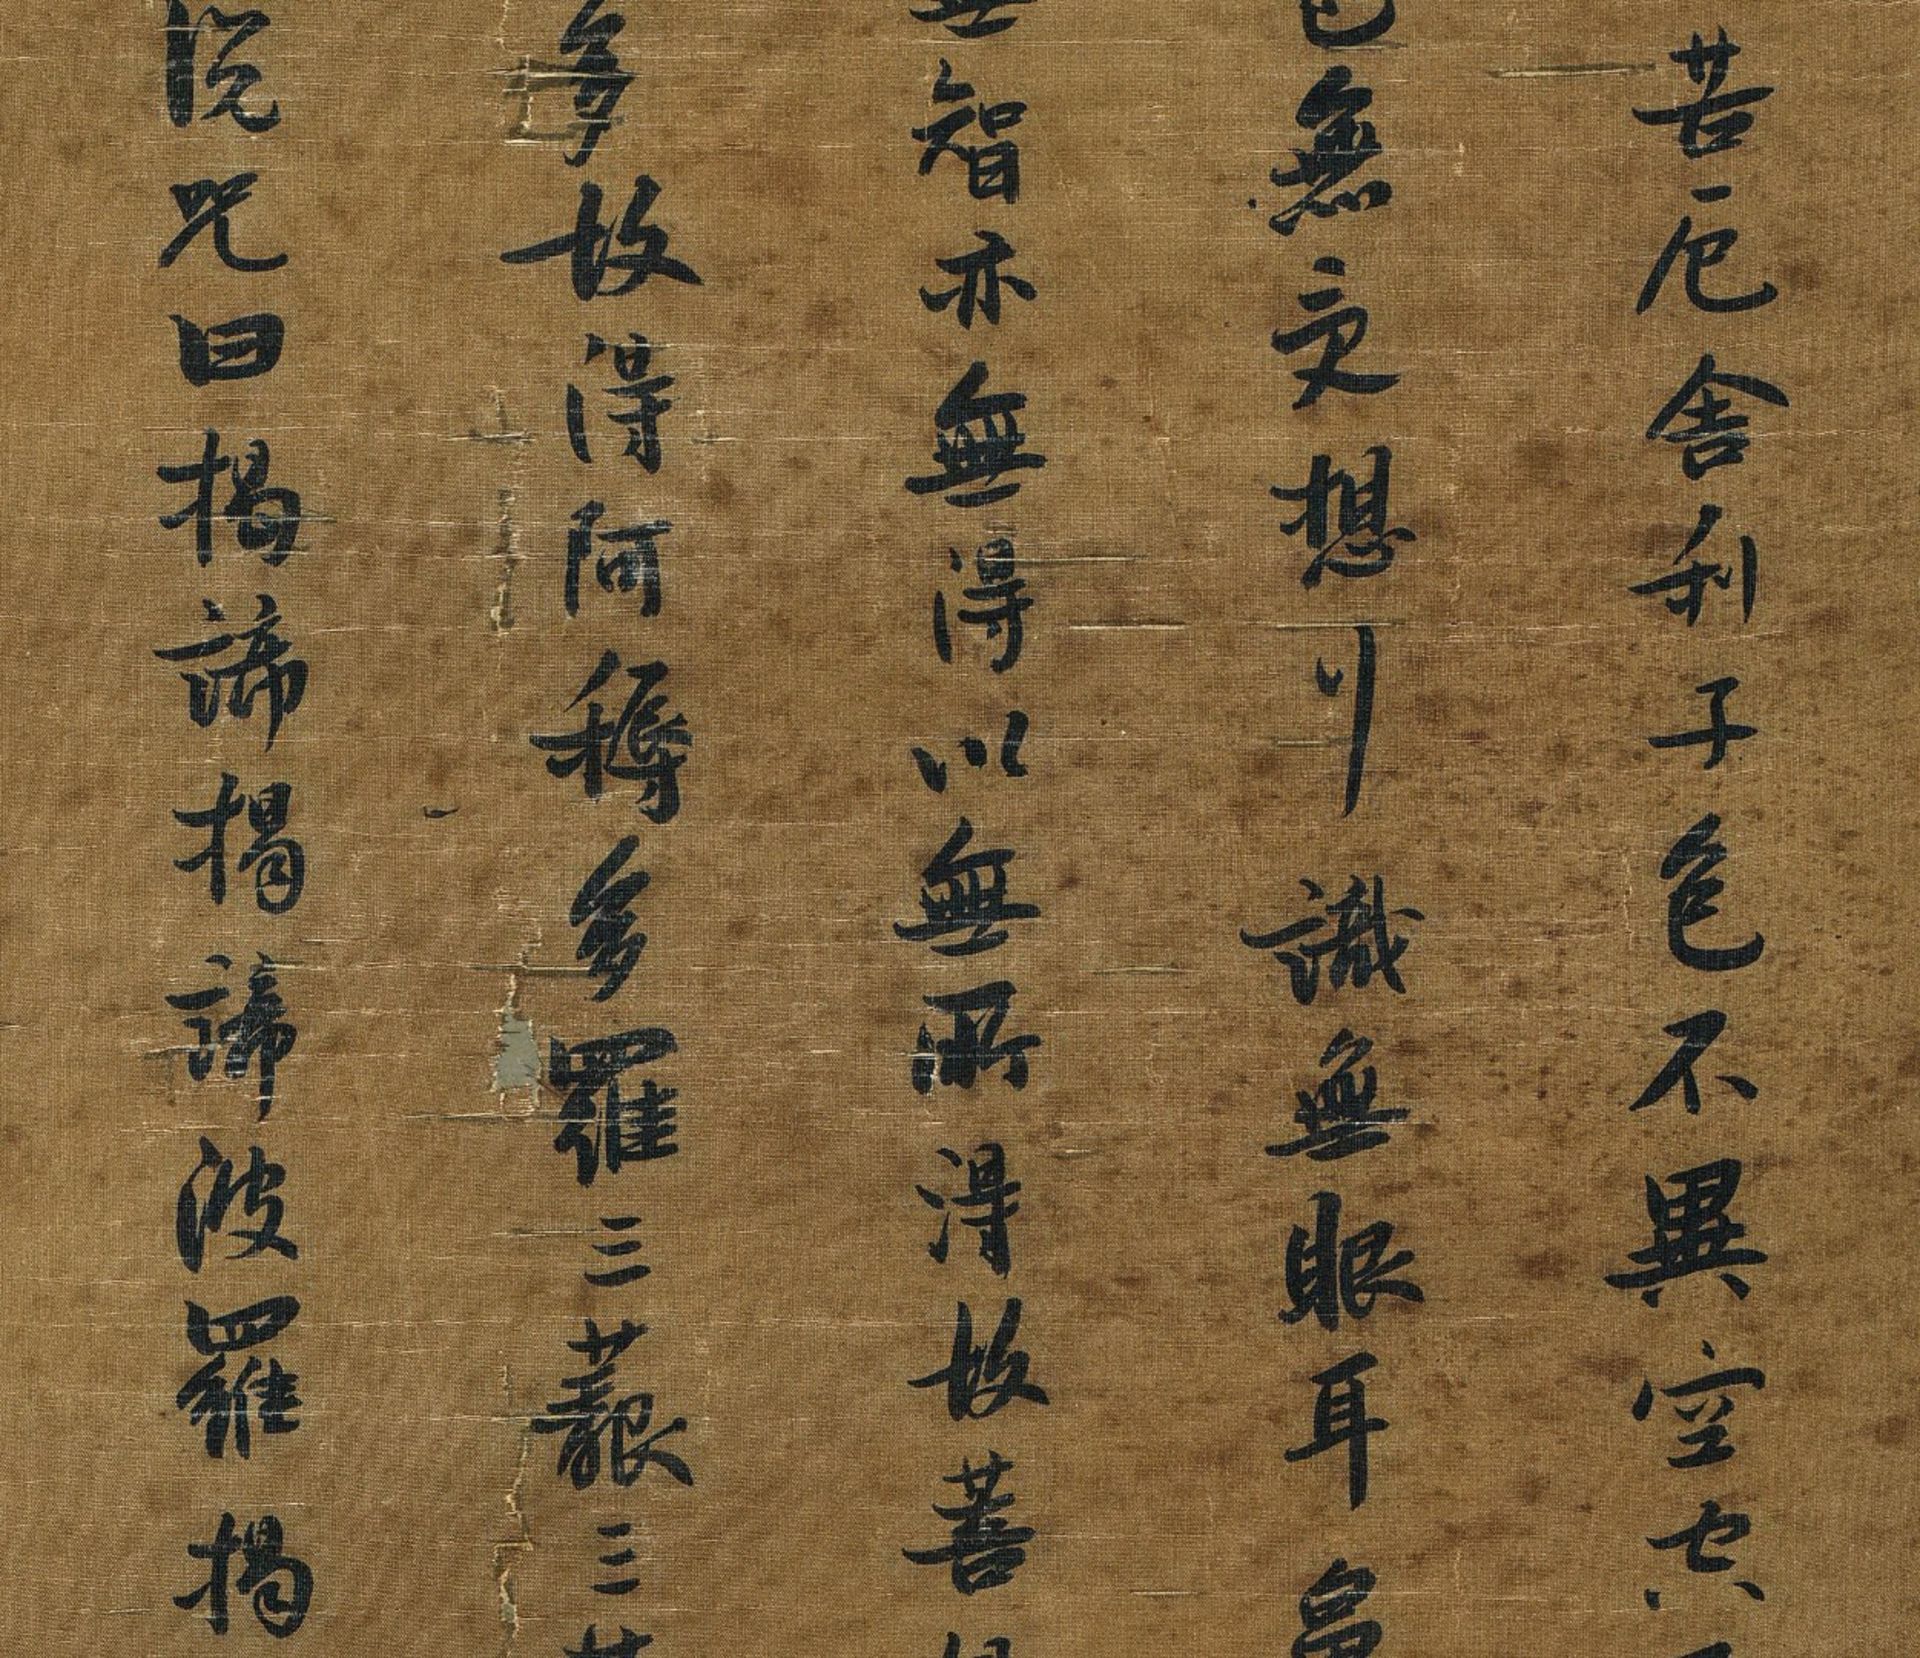 A Chinese Scroll Calligraphy By Zhang Ruitu - Image 4 of 12